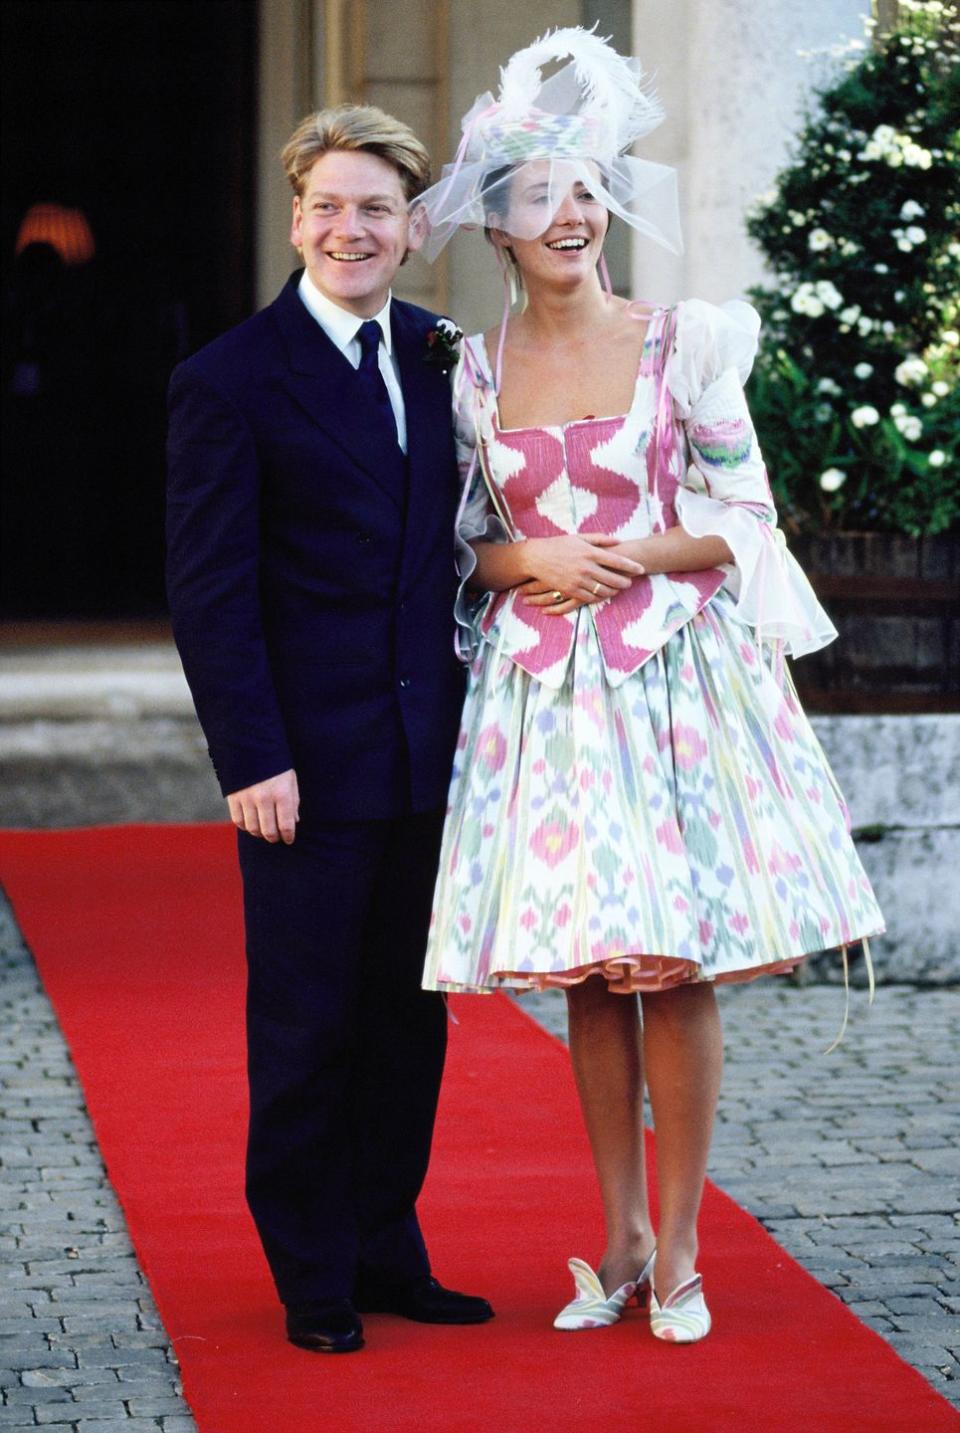 <p>In 1989, Emma Thompson married Kenneth Branagh at Cliveden House. She donned a knee-length white, fuchsia, and pistachio printed top and shirt, complete with with puffed sleeves. </p>